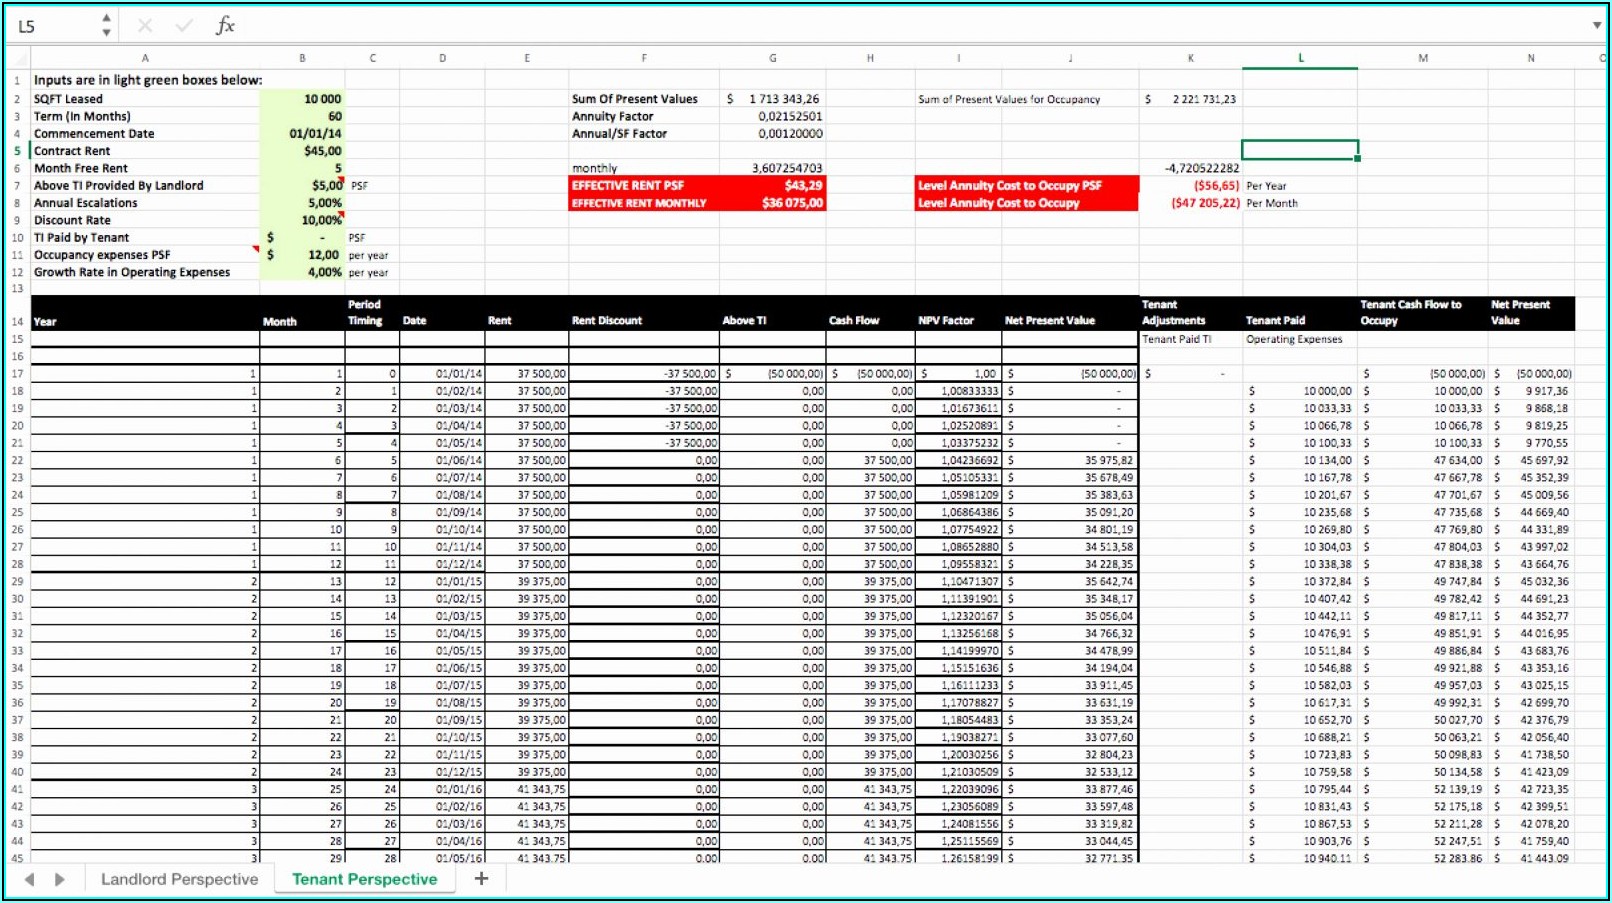 Client Database Template Excel